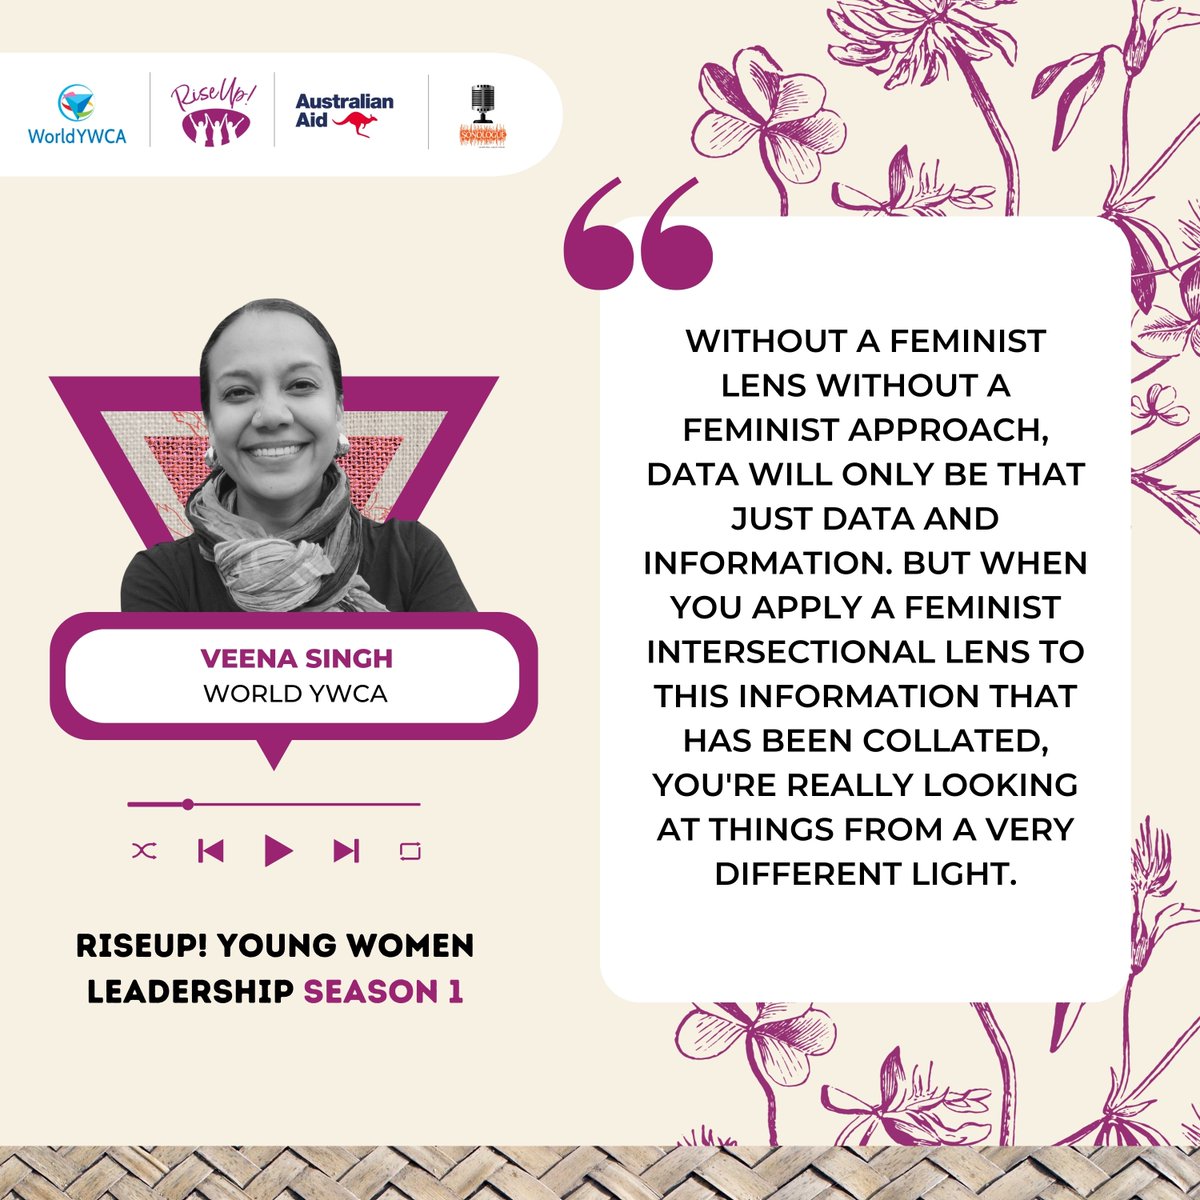 🎧Tune in to Episode 5 of #RiseUp! Podcast on 'Evidence Generation', where #YWCALeader @veenasingh shares profound insights on data empowerment through a feminist lens. Together, let's ensure data benefits women & young women. 🎙️cutt.ly/3wVfY4pd